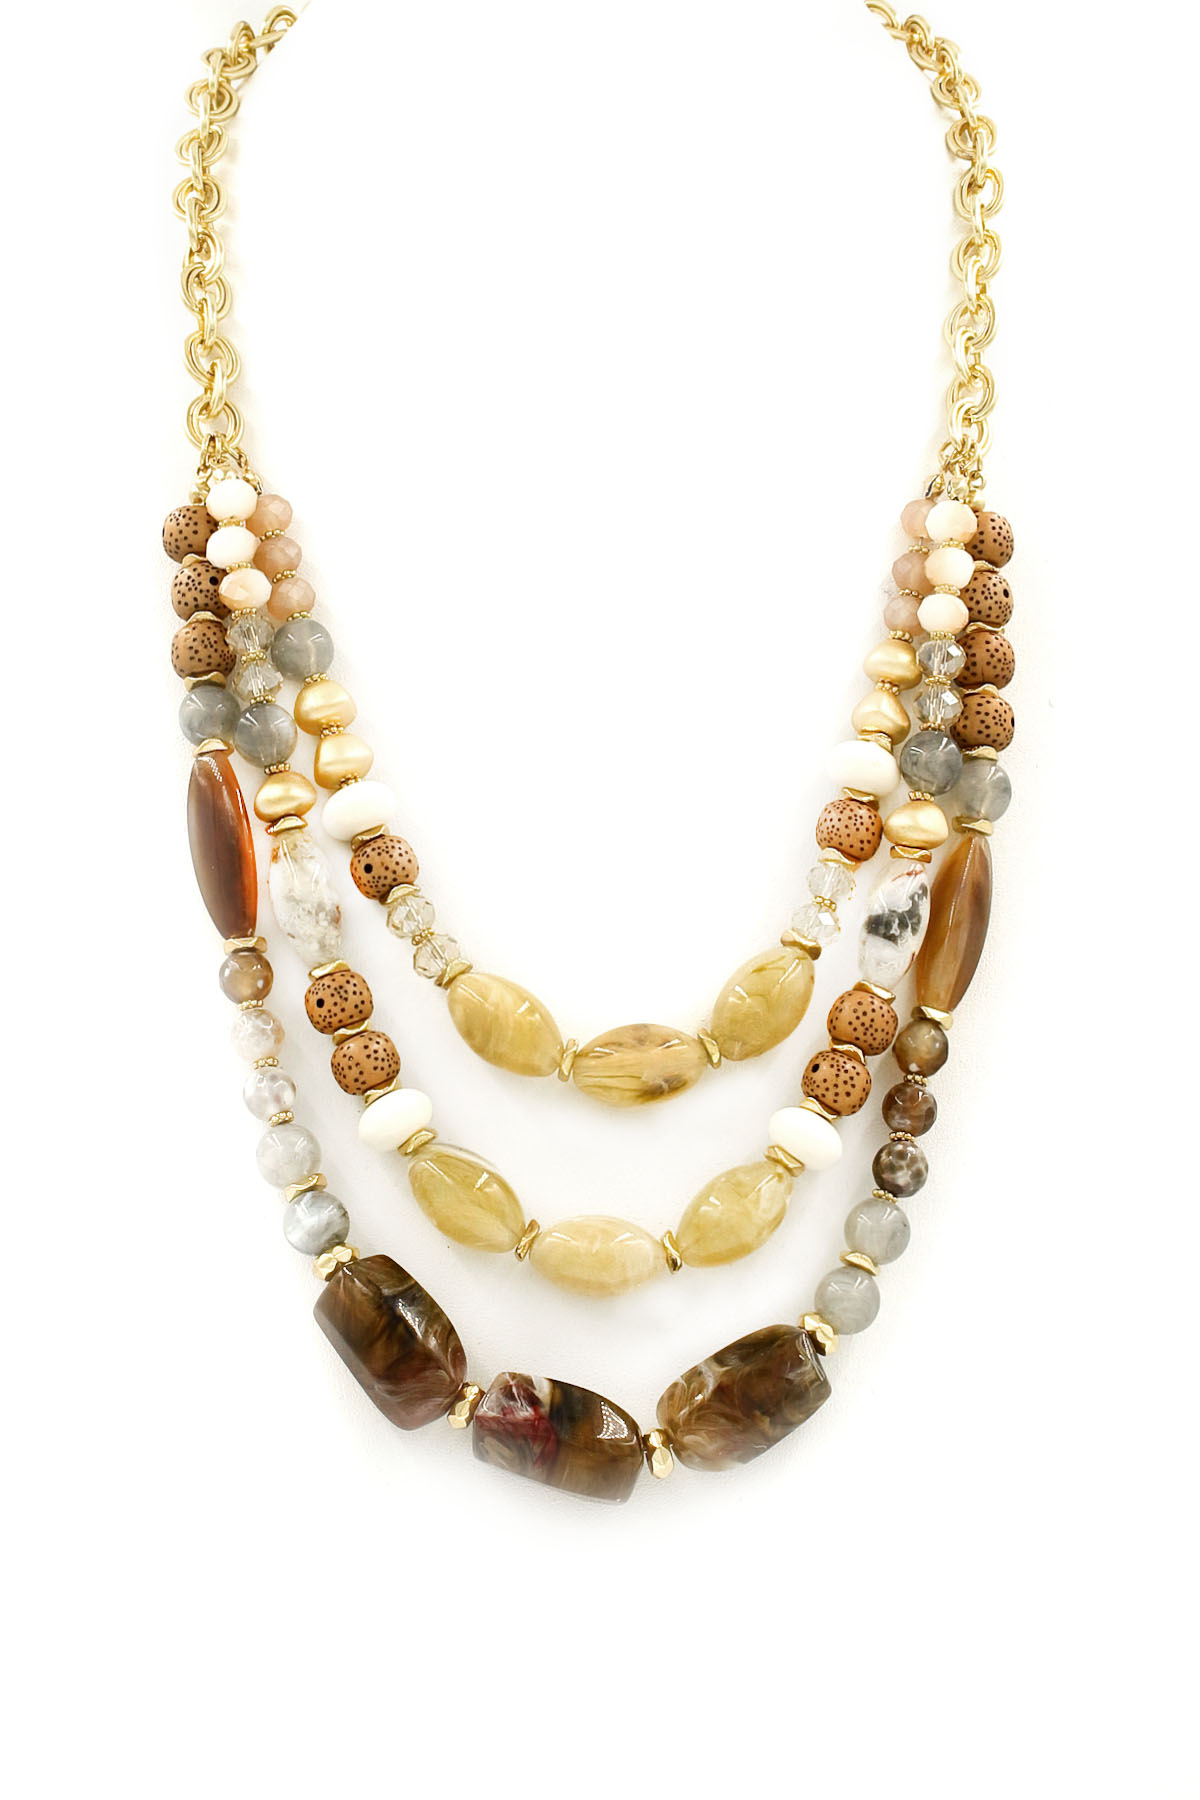 Acrylic Stone/Faceted Bead Necklace Necklaces